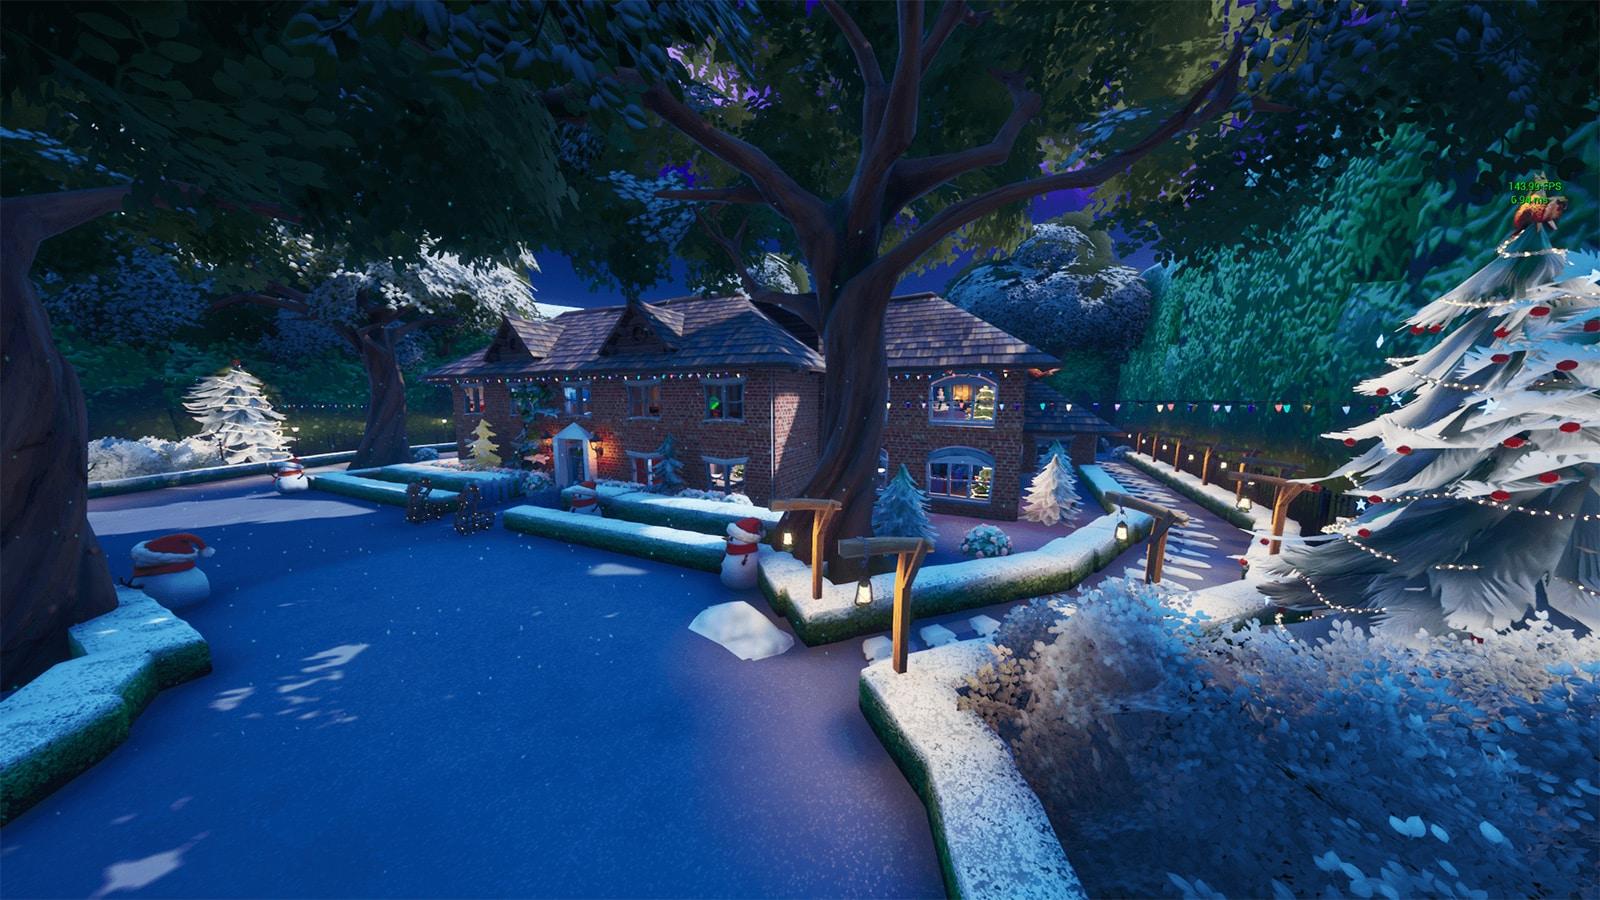 The Home Alone Prop Hunt map in Fortnite